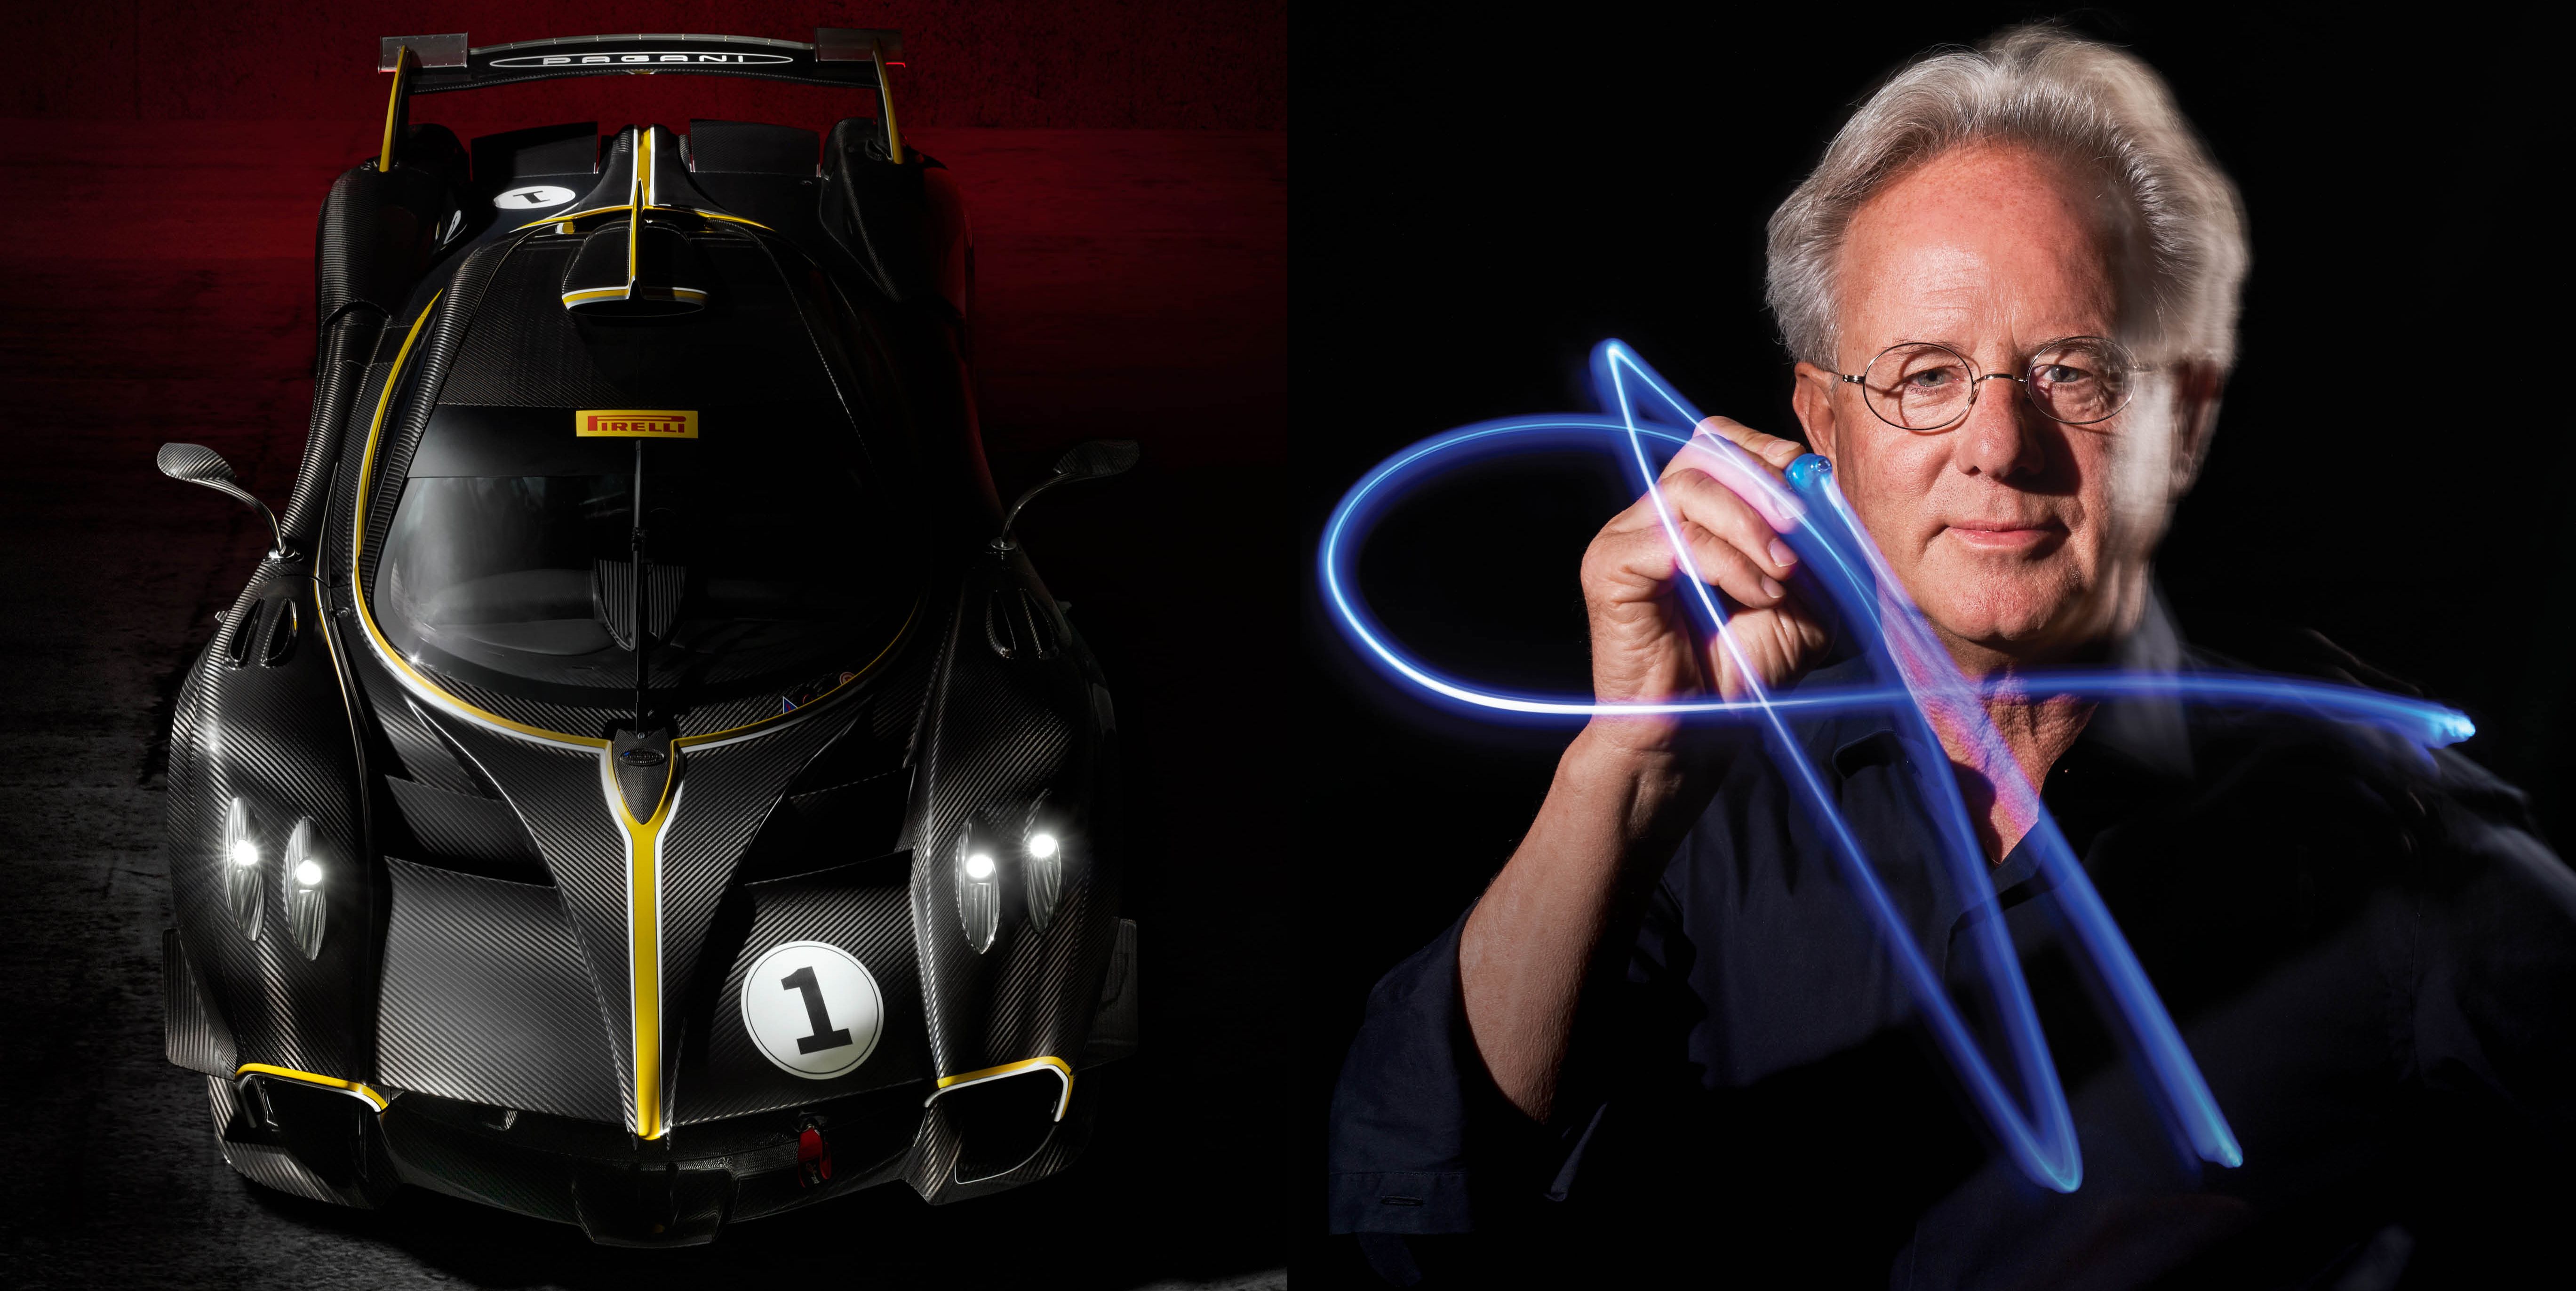 Pagani: The Man Who Signs Every Car